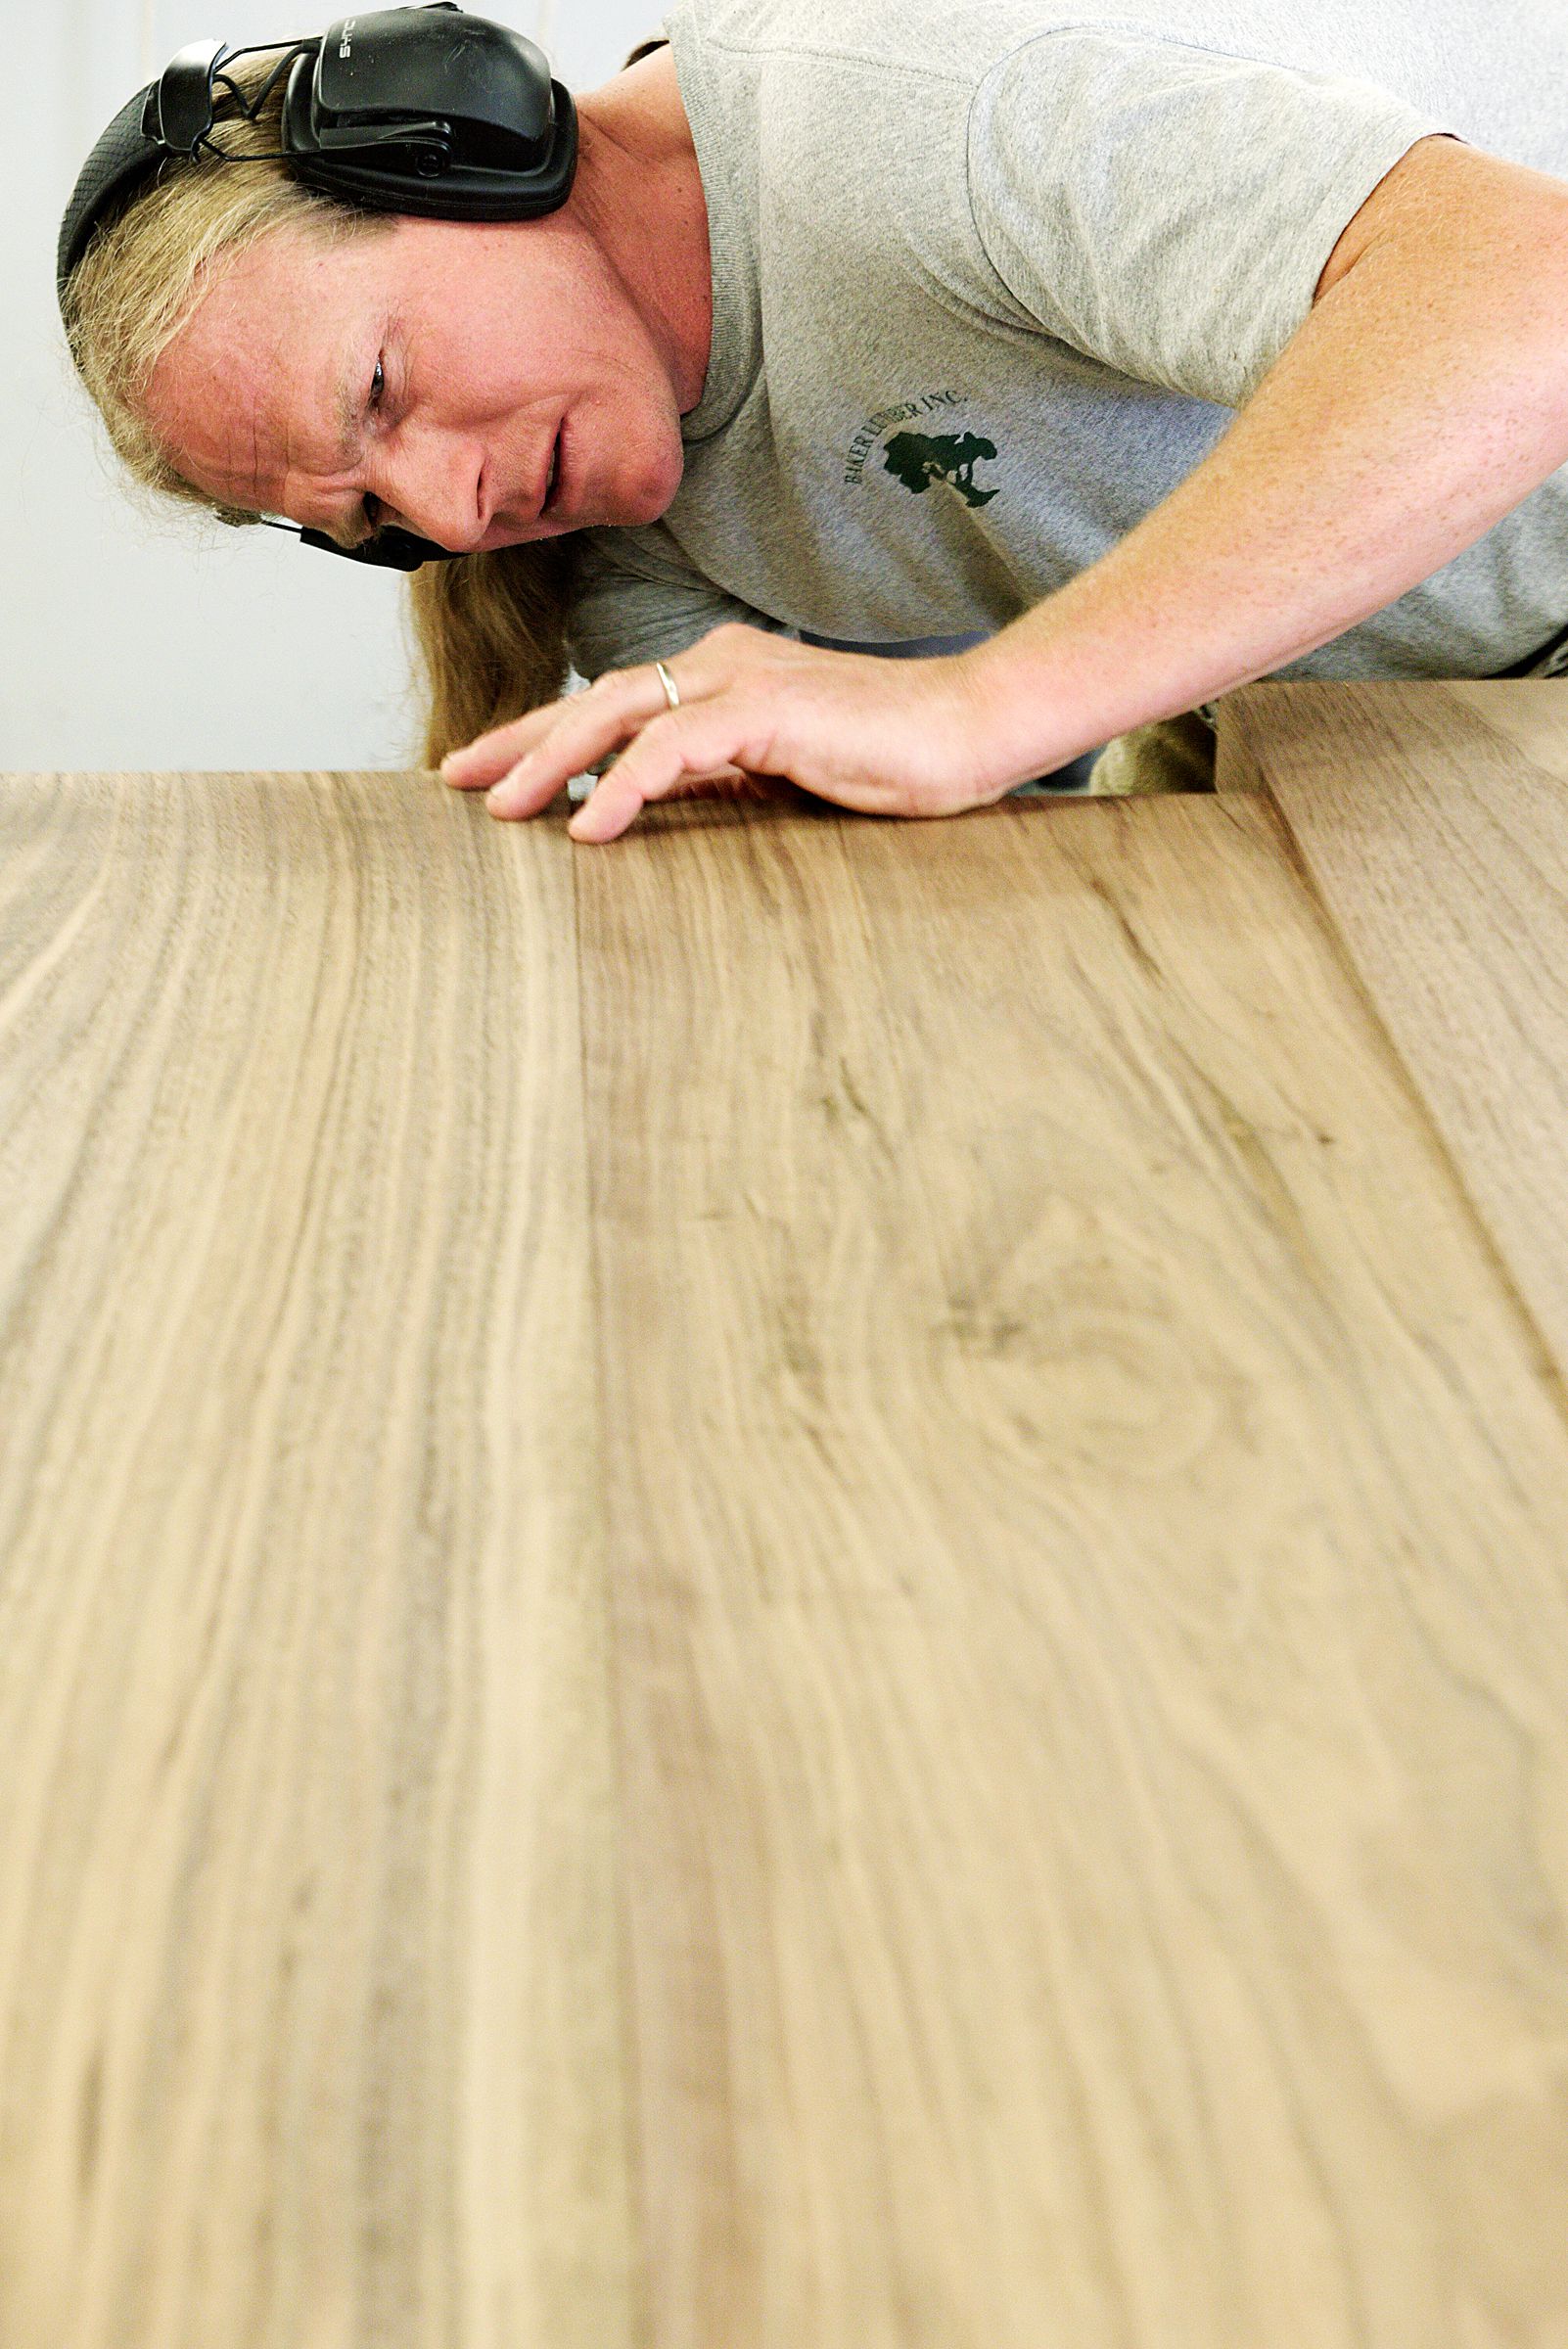 Cabinet maker Andy Mulligan measures the thickness of walnut boards that will be joined to make a countertop for a residential customer in the Trumbull-Nelson Construction Company's carpentry shop in Hanover, N.H., Thursday, September 15, 2017. Trumbull-Nelson is celebrating 100 years since its founding in 1917. (Valley News - James M. Patterson) Copyright Valley News. May not be reprinted or used online without permission. Send requests to permission@vnews.com.